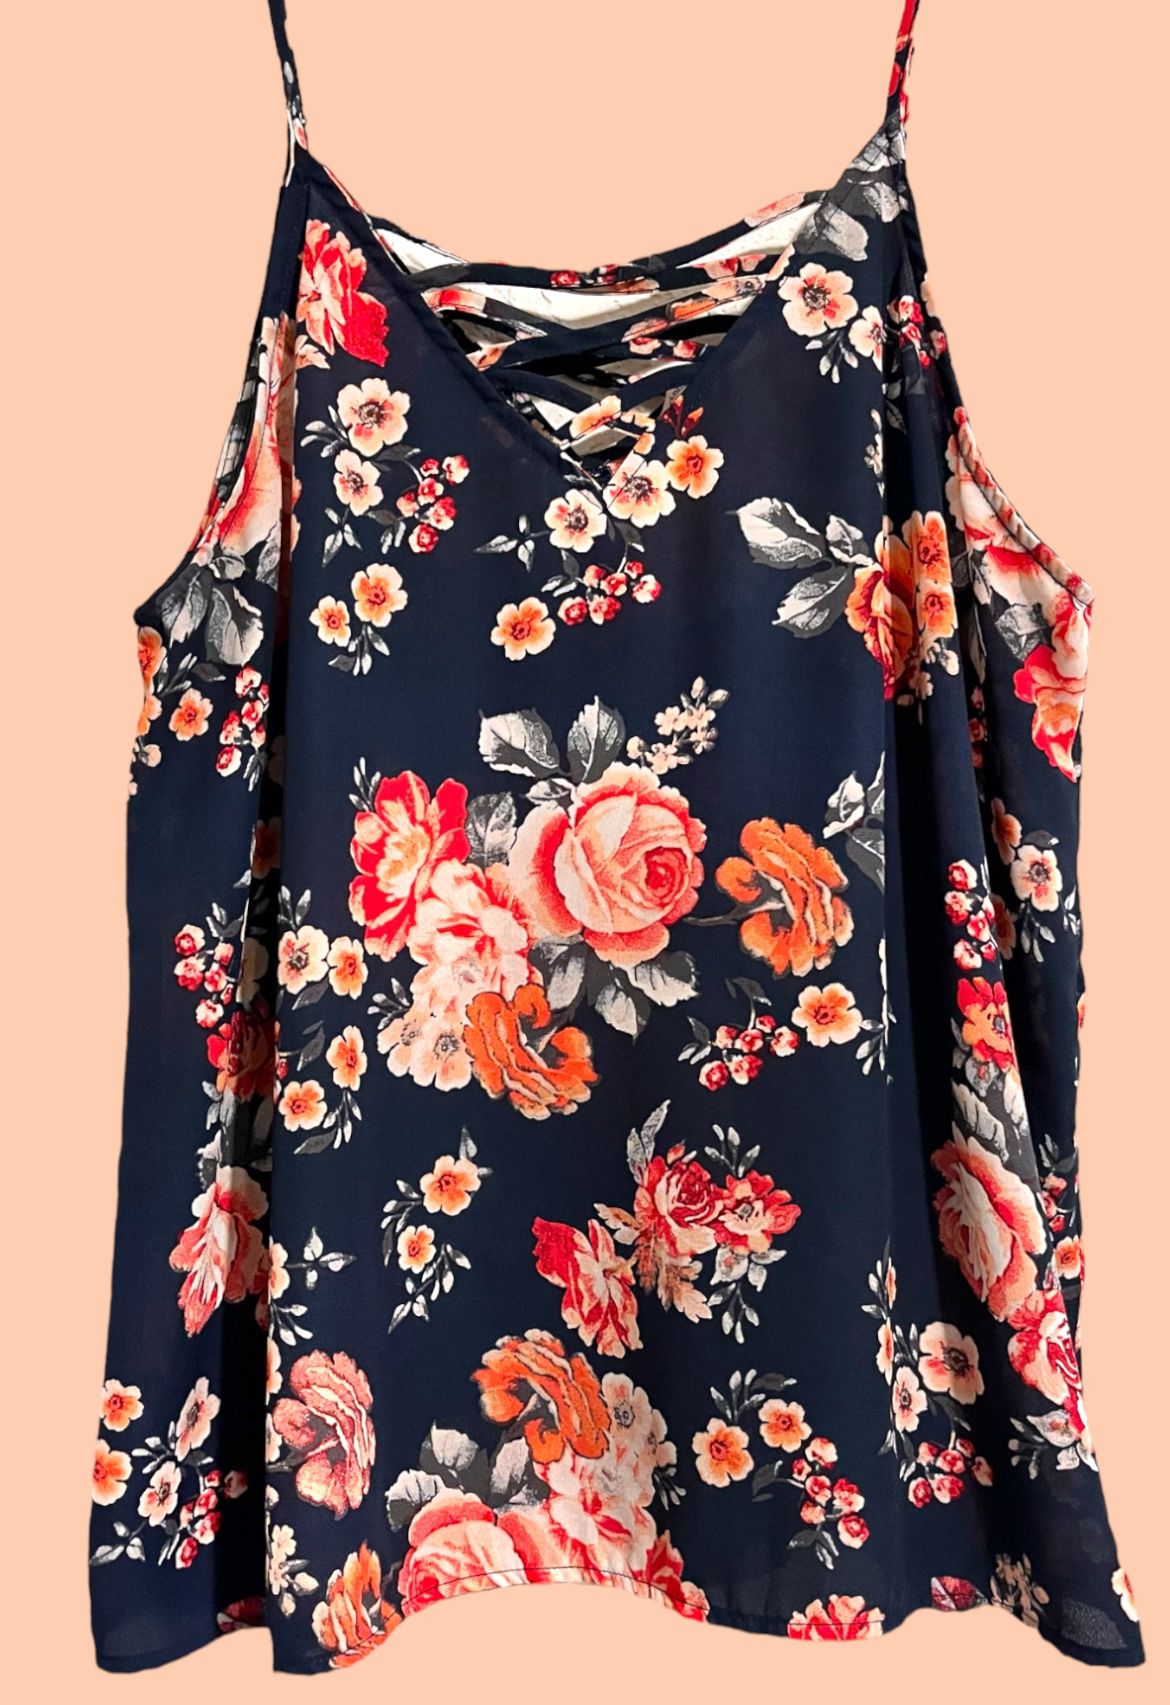 Floral flirty top by Wishful Park, perfect for Spring/Summer brunches!